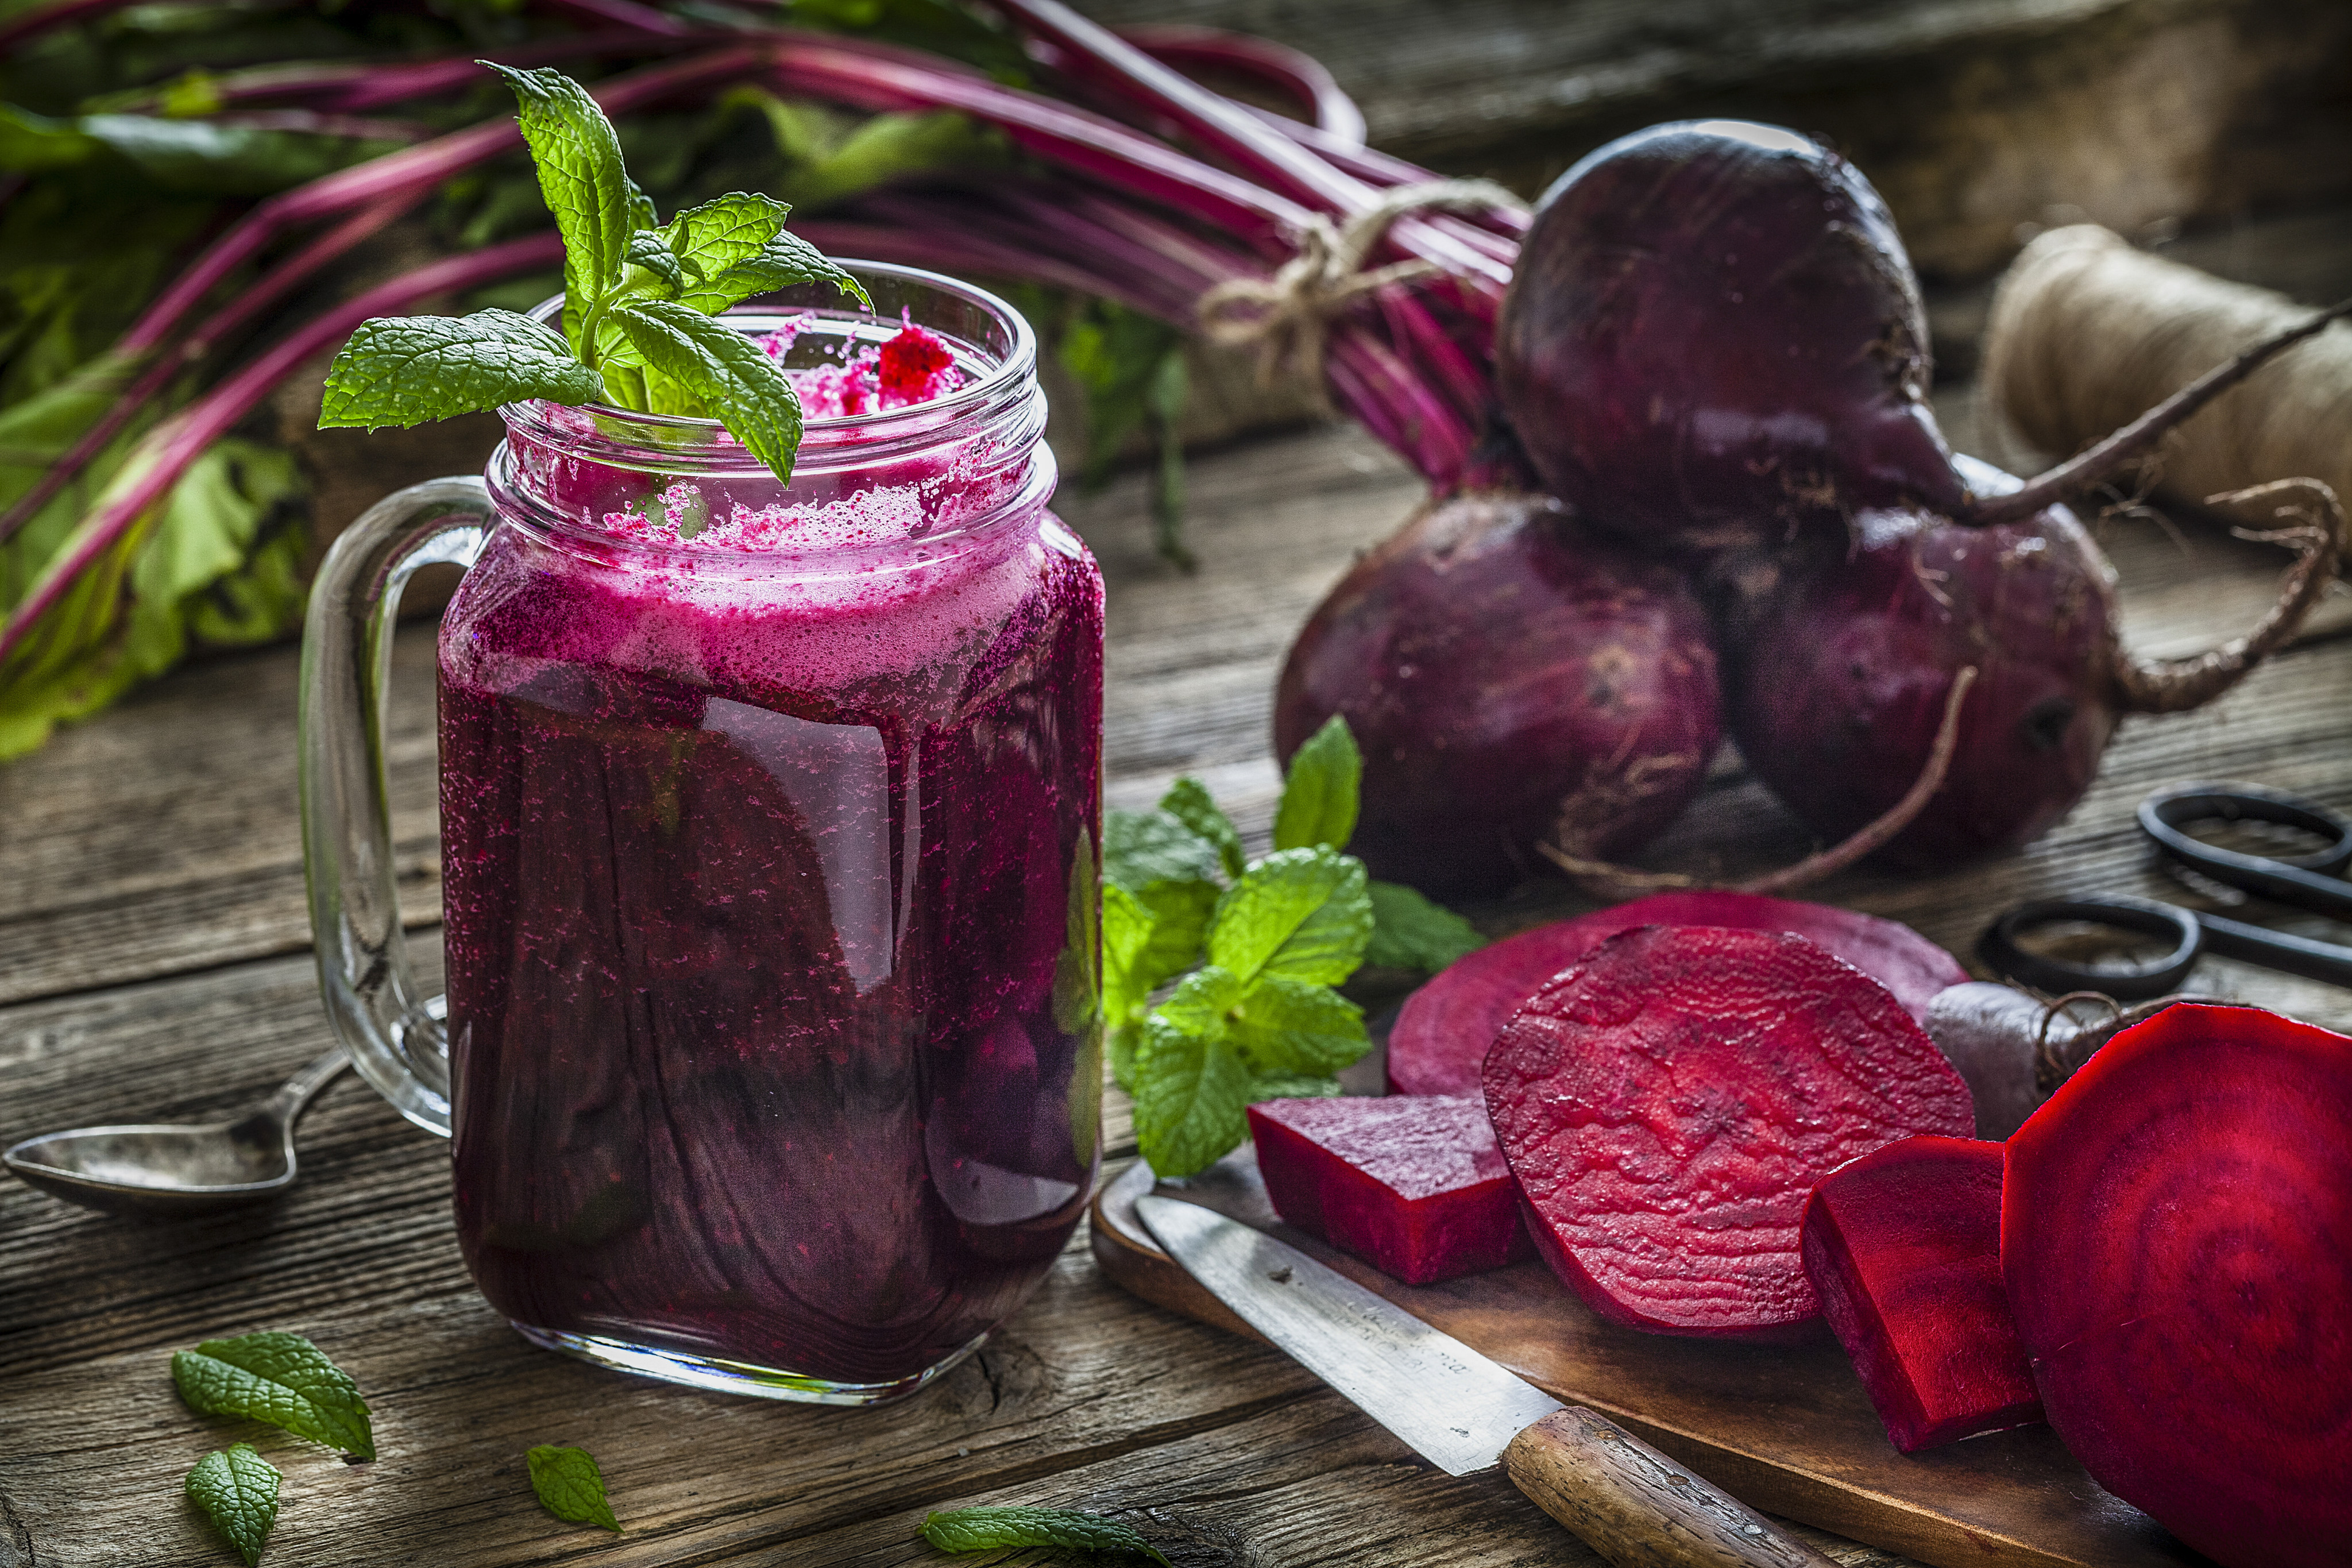 Everyday superfoods such as beetroot can offer significant health benefits, from promoting brain health and muscle endurance to lowering cholesterol. Photo: Getty Images